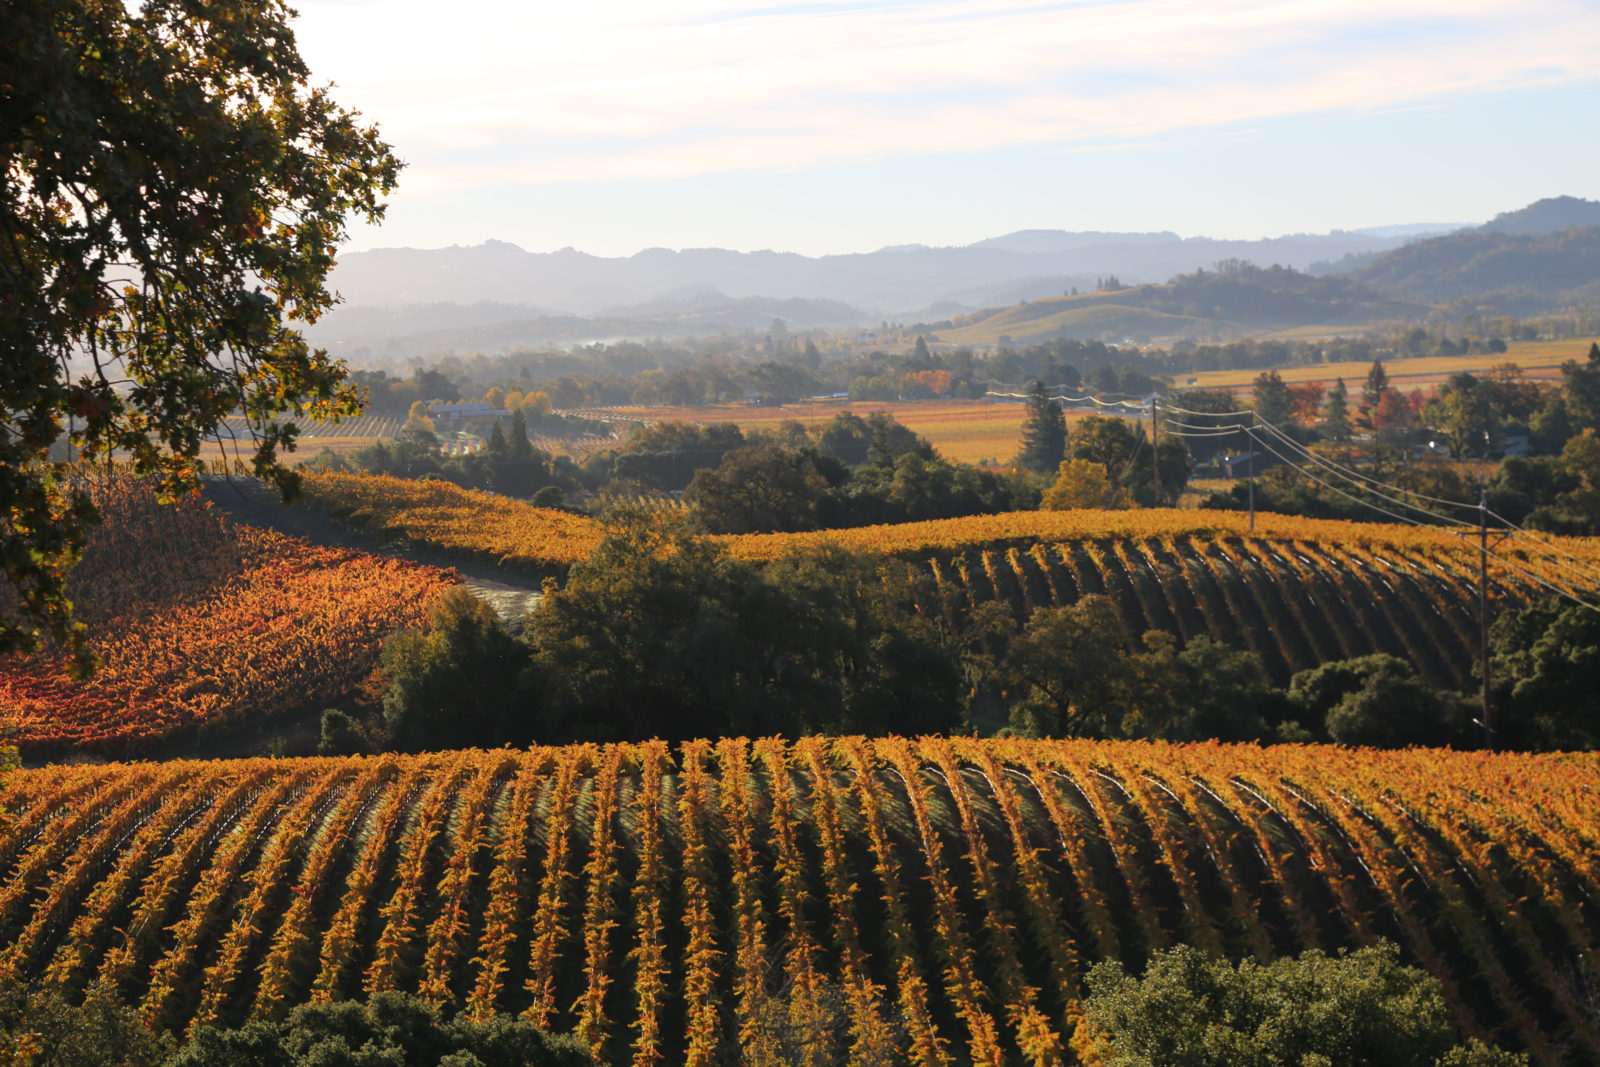 Colorful autumn leaves on vineyards rows with hills in background on clear, fall day.